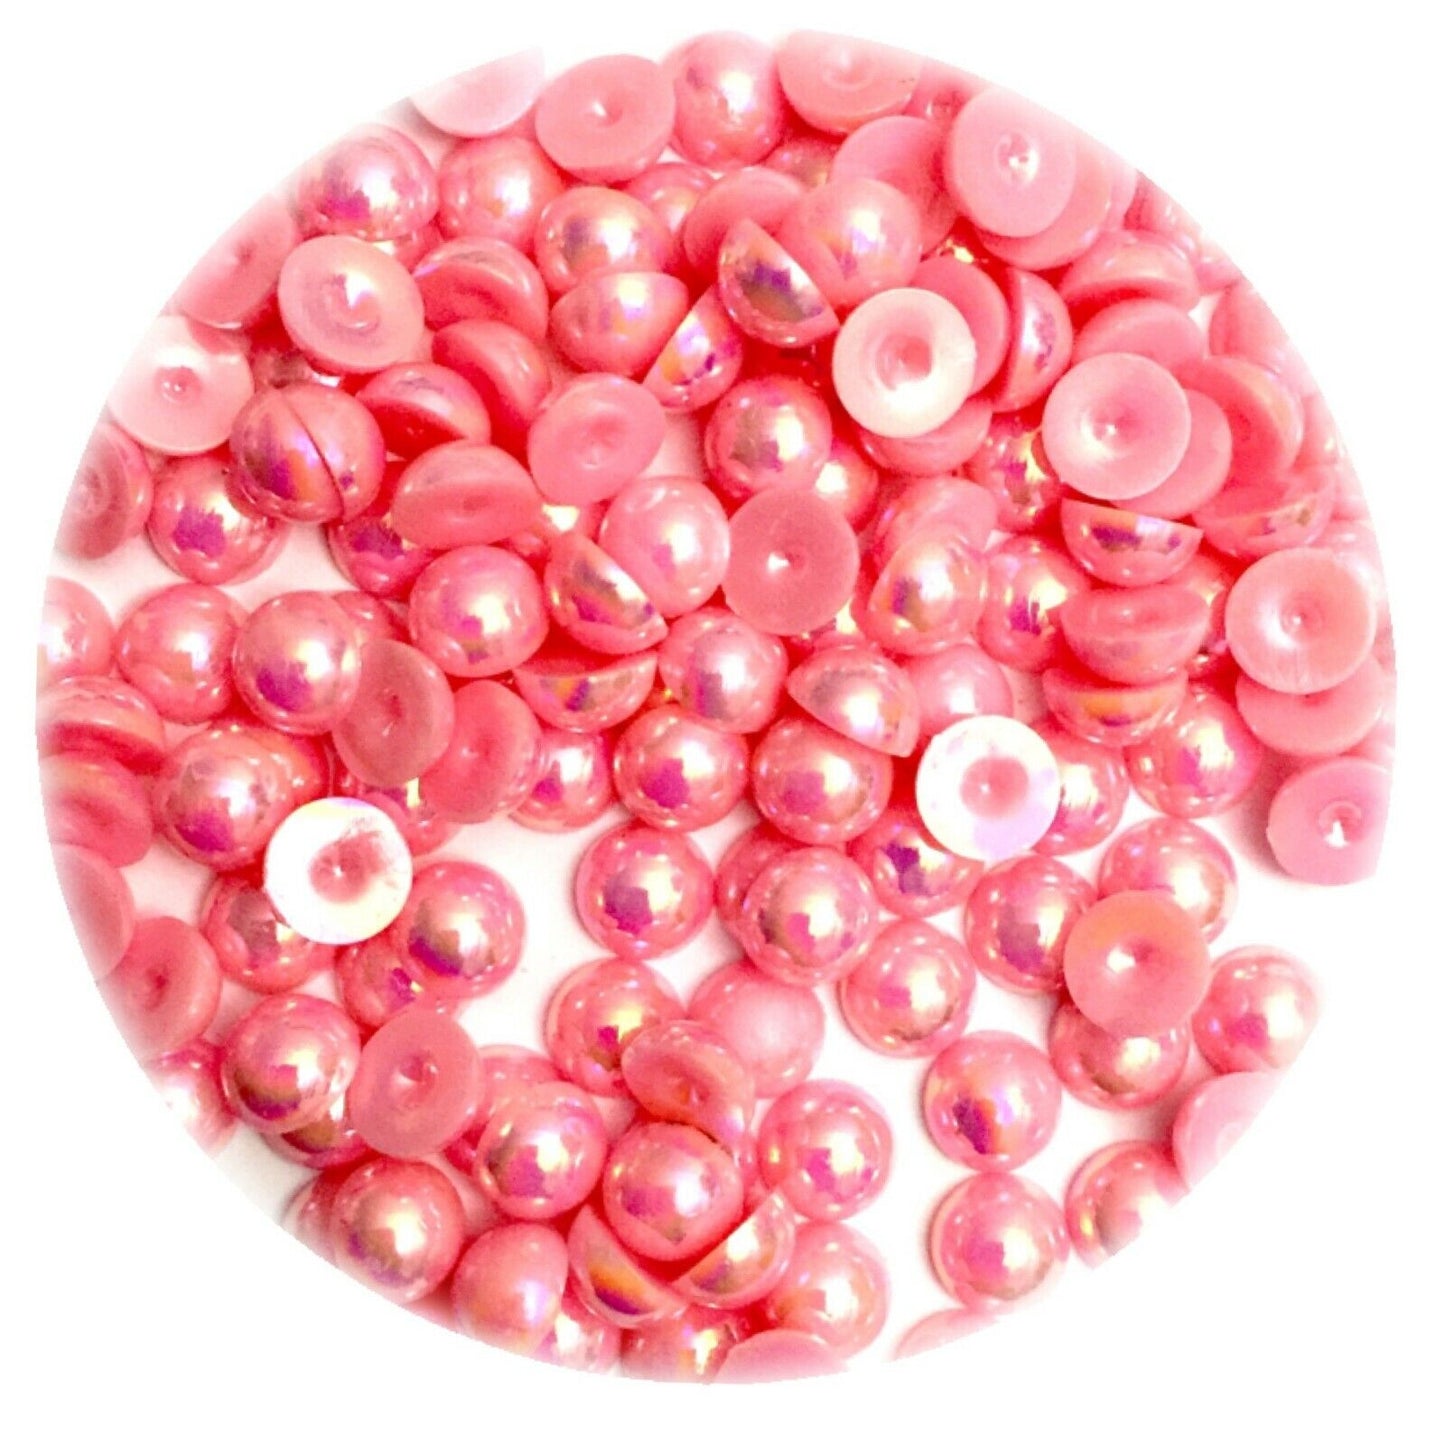 100x Half Pearl 10mm Flat-back Resin Beads - Choose Your Colour